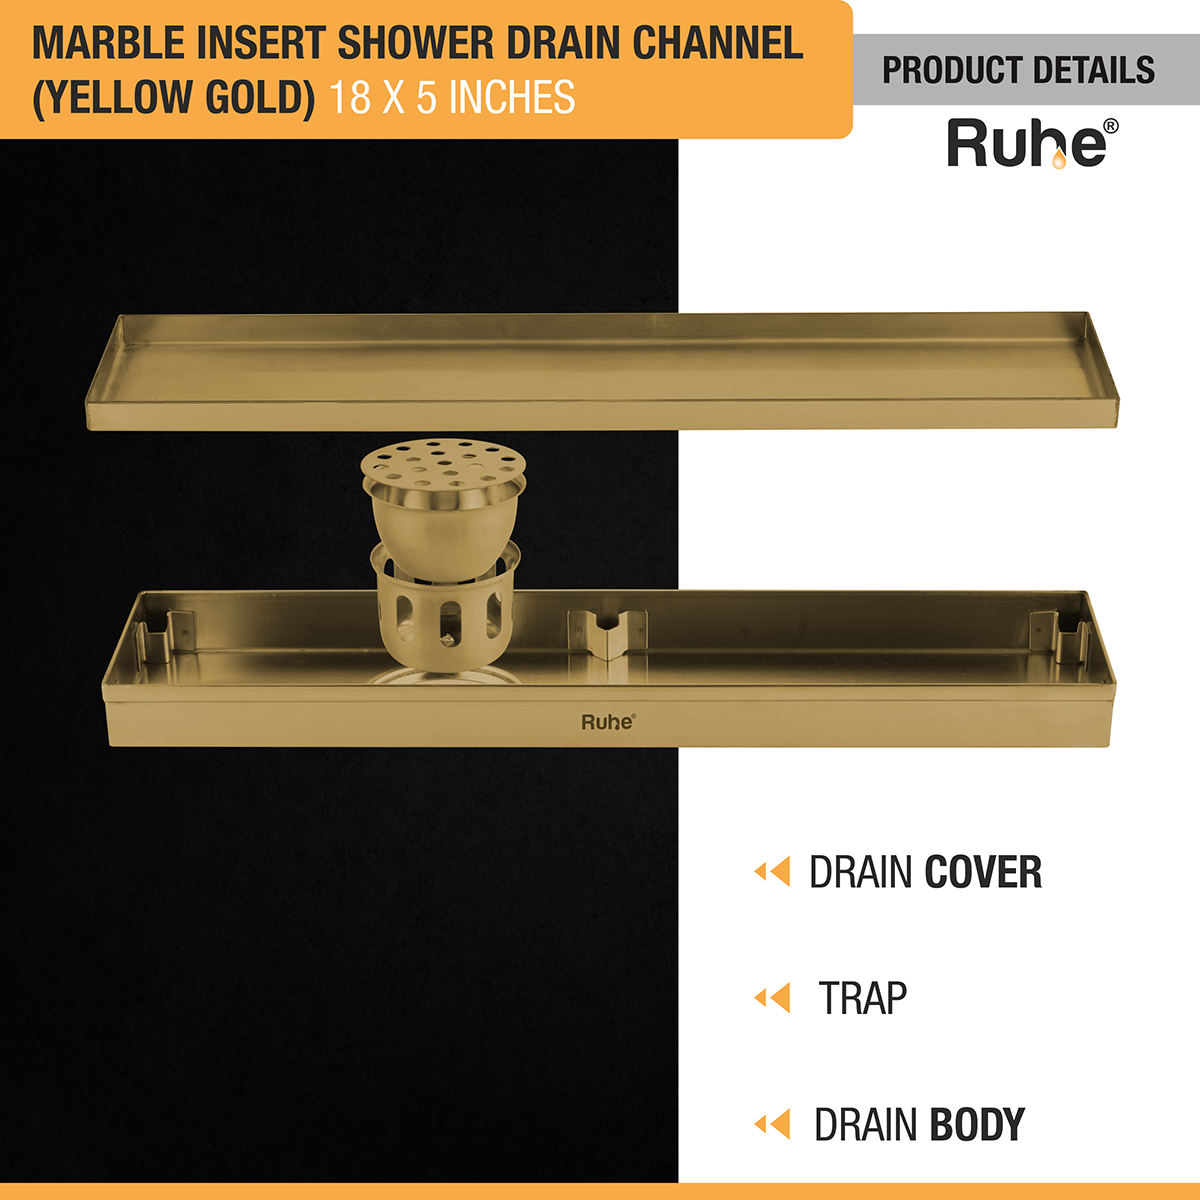 Marble Insert Shower Drain Channel (18 x 5 Inches) YELLOW GOLD PVD Coated with drain cover, trap, drain body